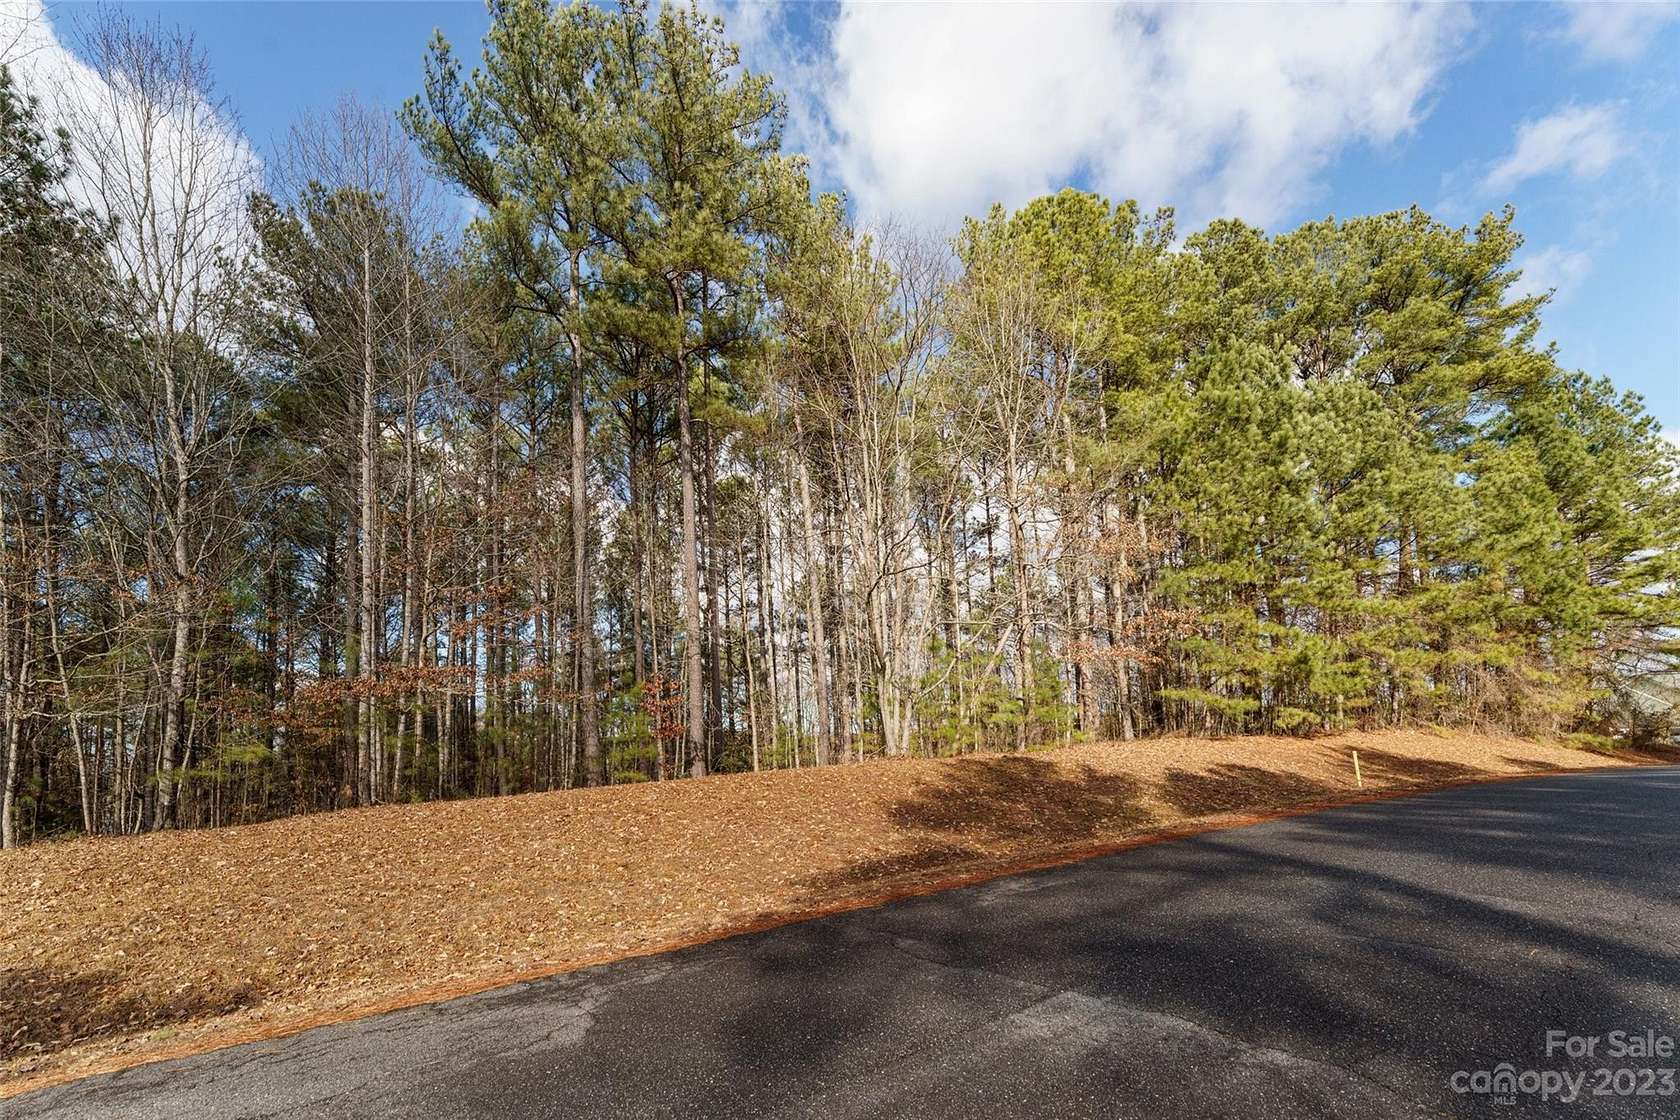 1 Acre of Residential Land for Sale in Connelly Springs, North Carolina